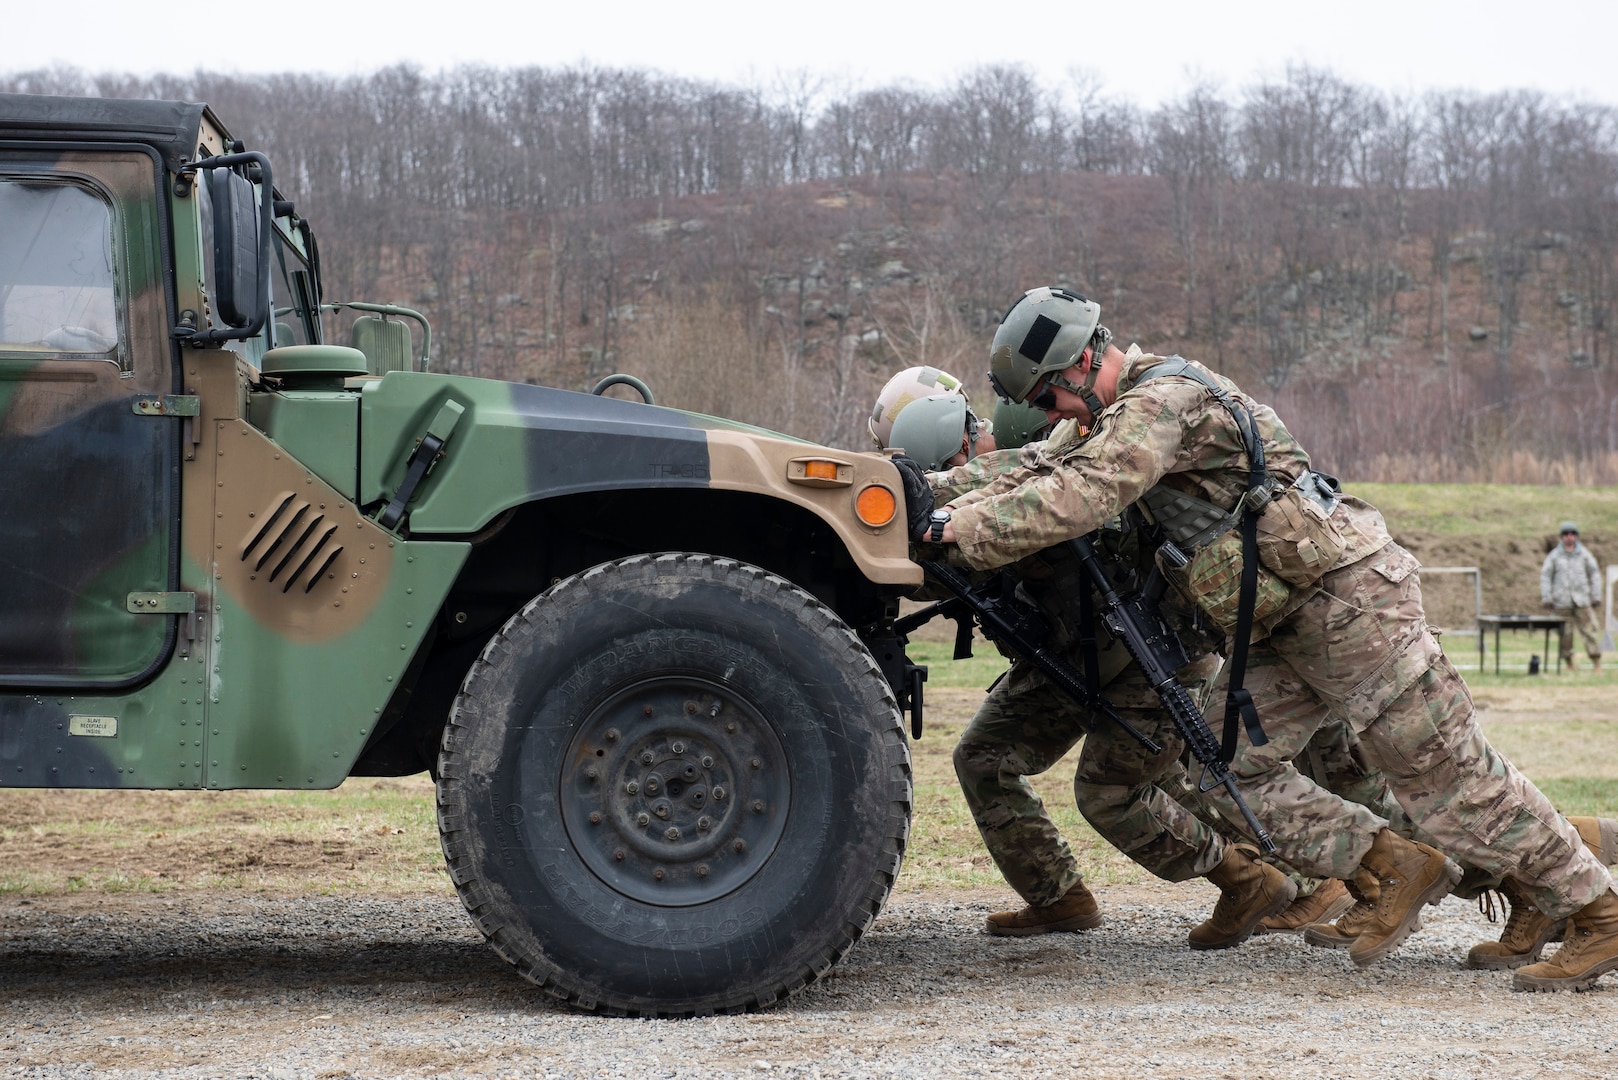 Army ROTC cadets push a Humvee between designated areas to earn points for this challenge during the 51st annual Sandhurst Military Skills Competition at the U.S. Military Academy at West Point, New York, April 12-13.